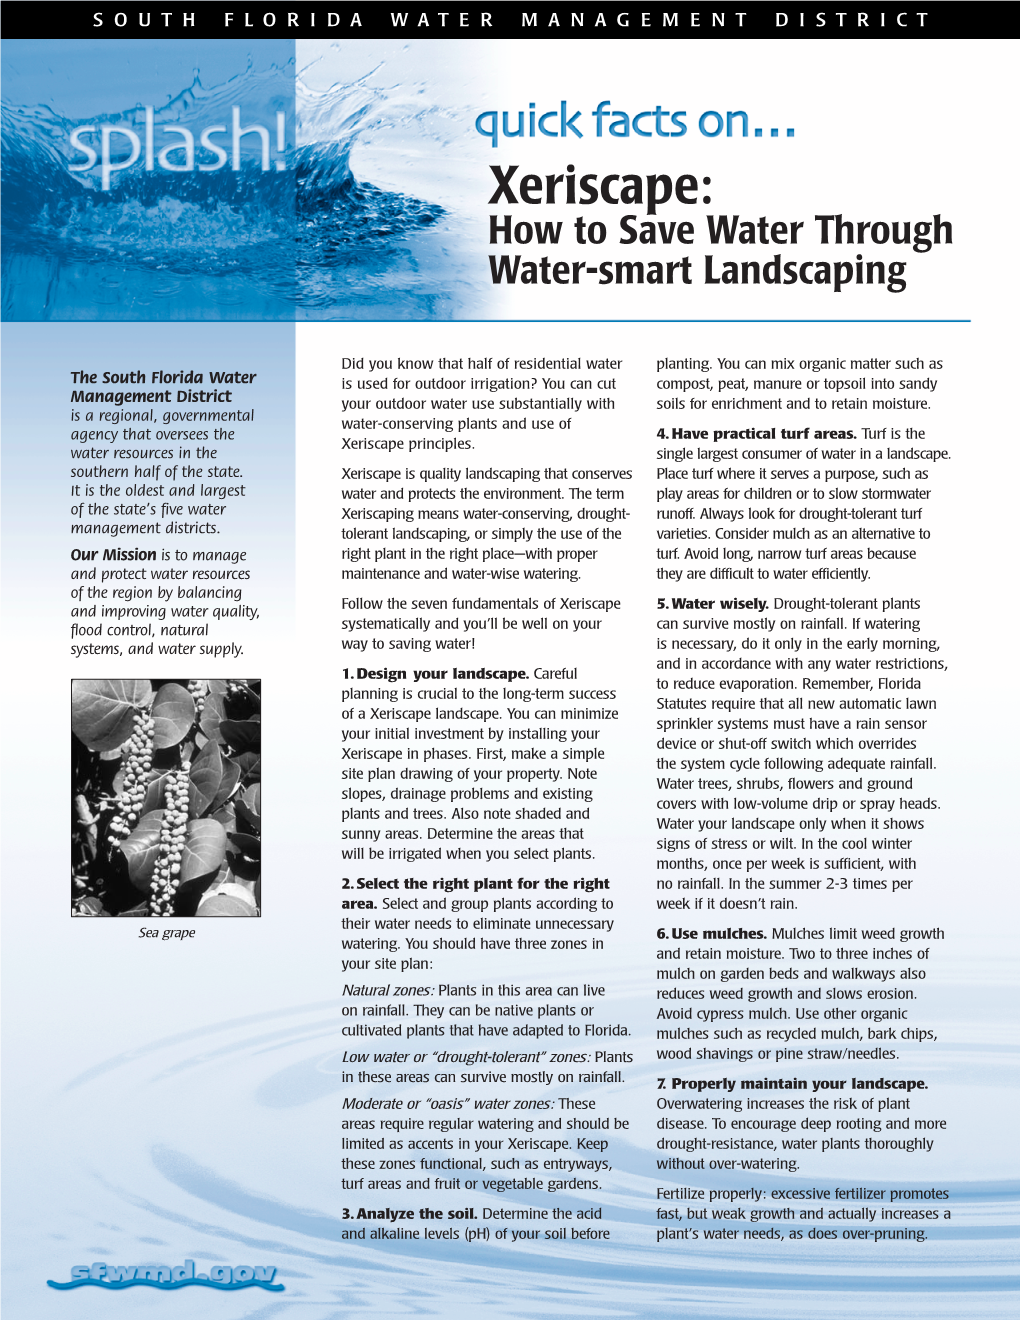 Xeriscape: How to Save Water Through Water-Smart Landscaping